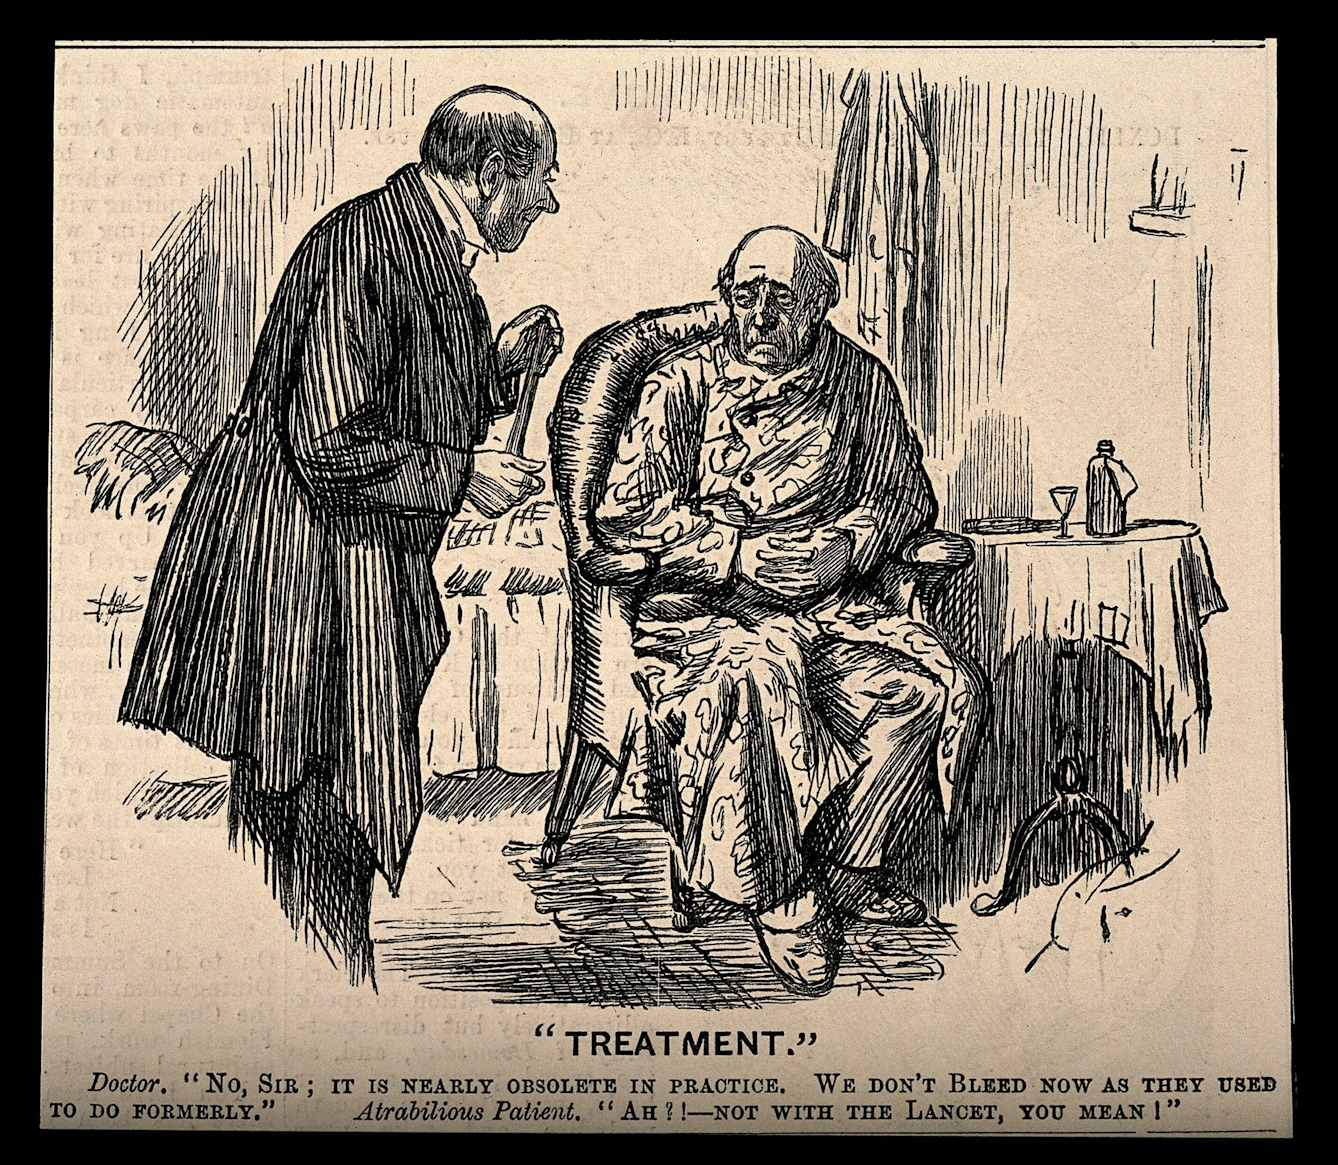 Black-and-white print showing a sad-looking man seated in an armchair wearing a housecoat with his hands clasped in his lap. To the left, a smartly dressed doctor leans over him, smiling. The lettering at the bottom has the doctor saying “No sir, it is nearly obsolete in practice. We don’t bleed now as they used to do formerly. The “atrabilious” patient replies “Ah!? Not with the lancet, you mean!”